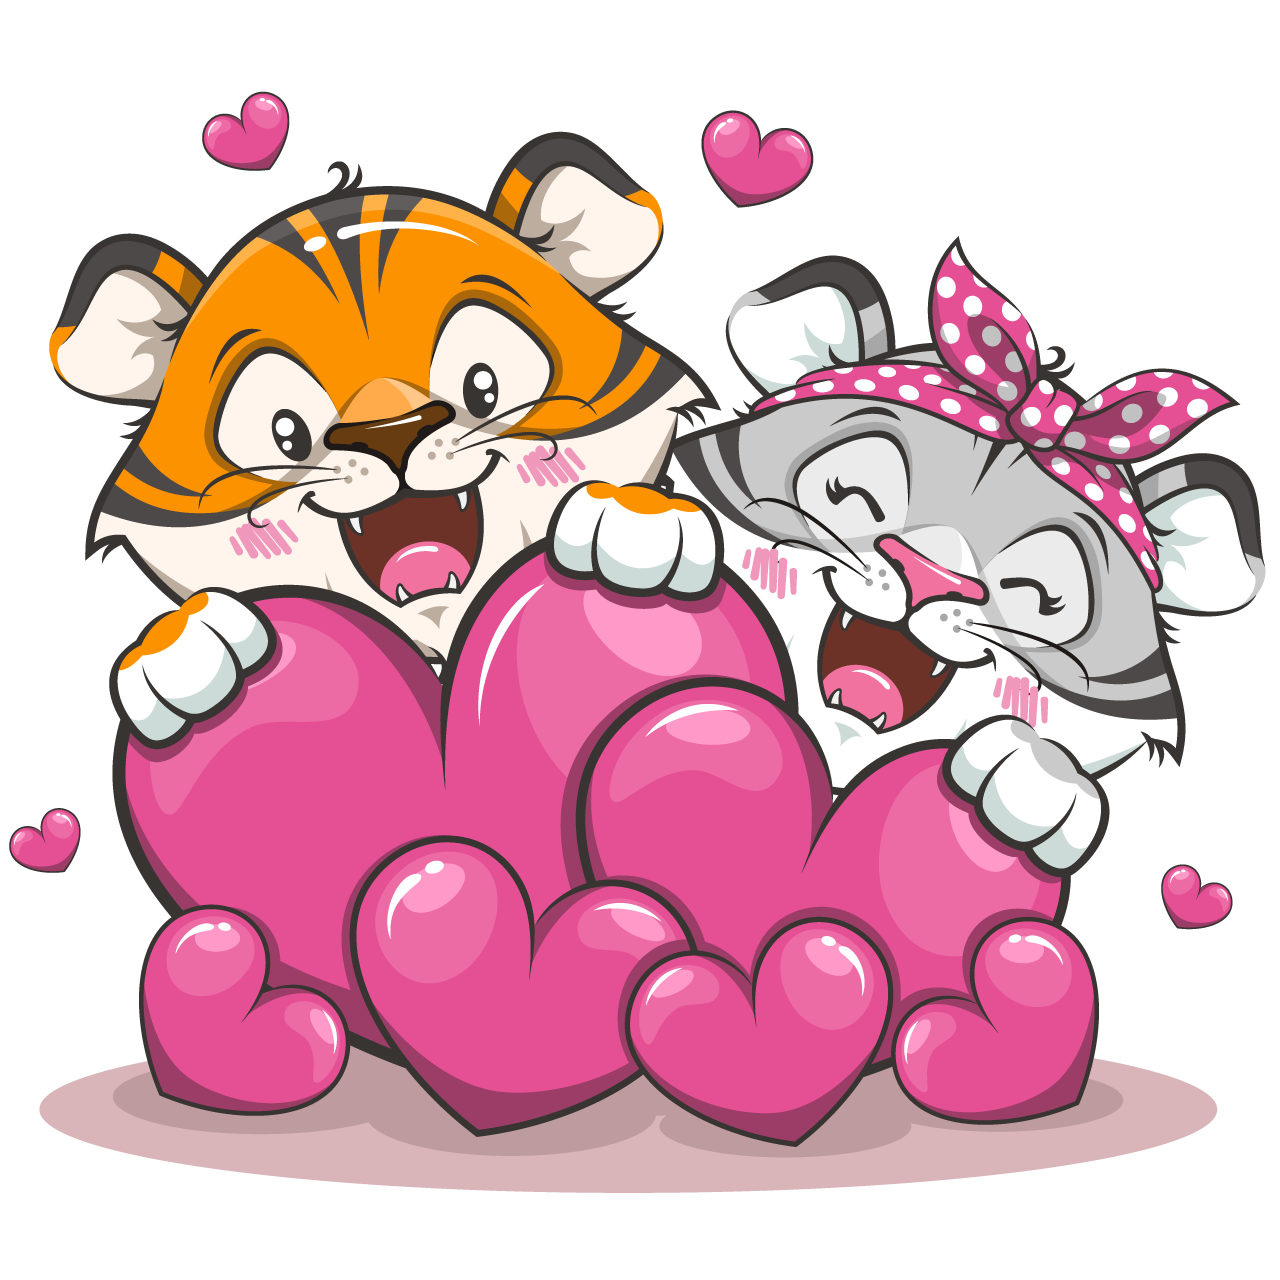 Red heart clipart couple love cute tiger with love heart animal valentine cartoon illustration